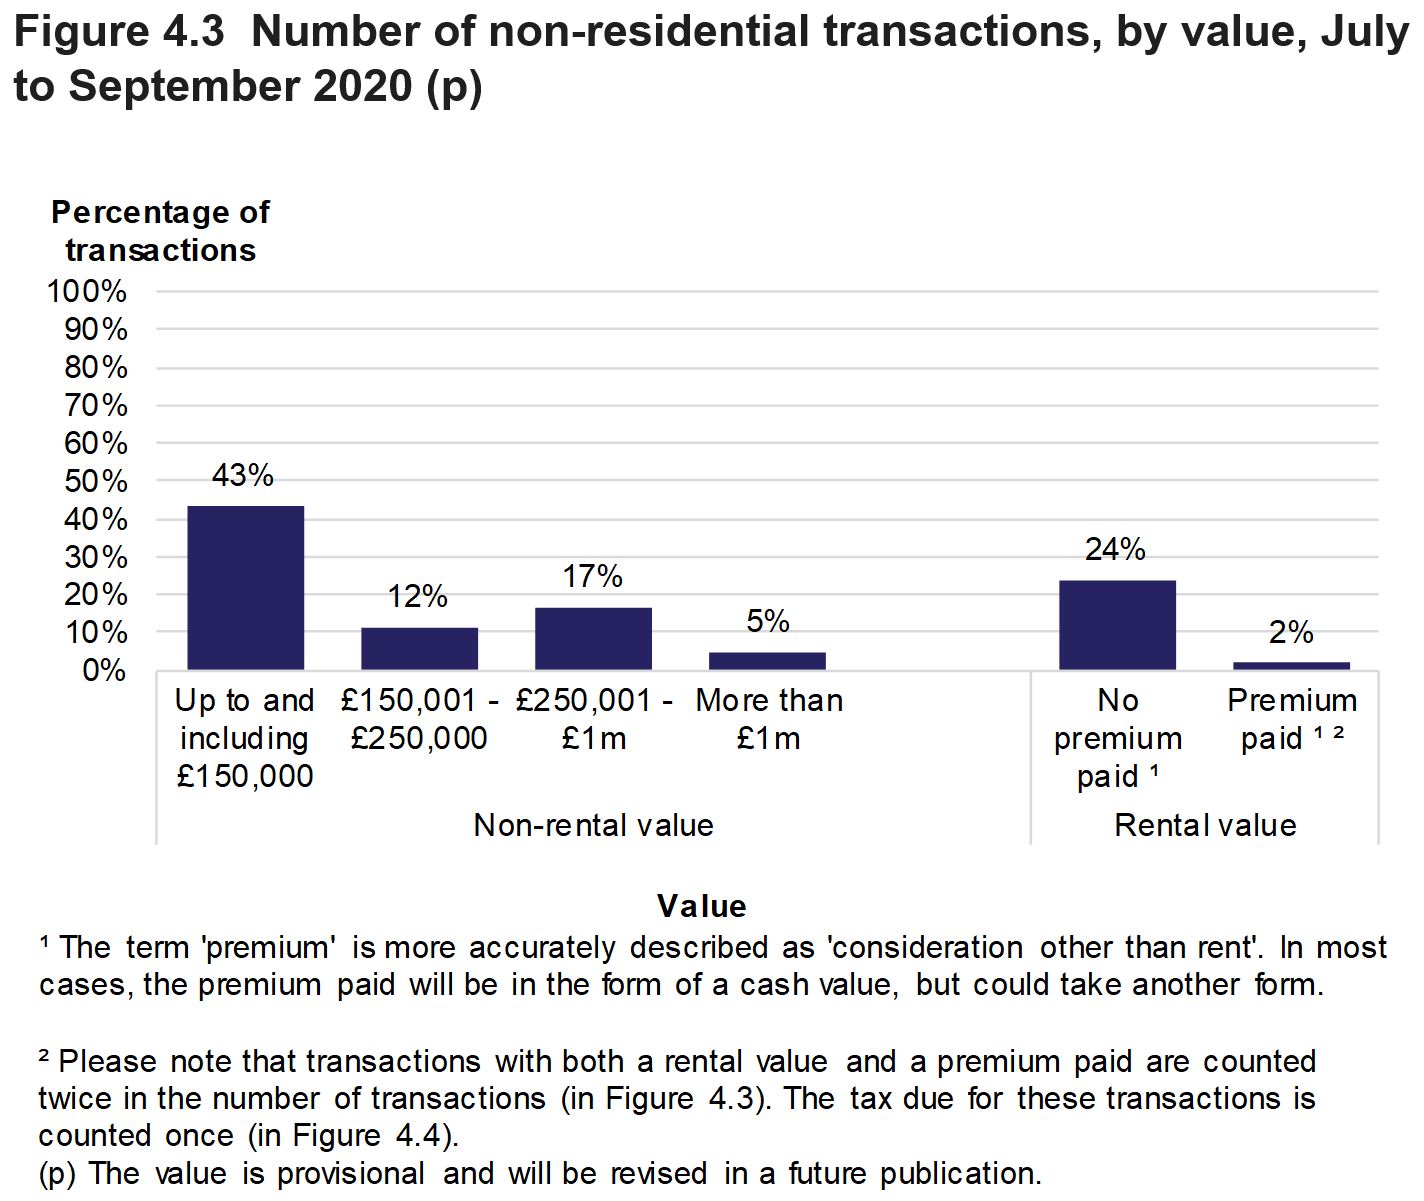 Figure 4.3 shows the number of non-residential transactions by value of the property. Data is presented as the percentage of transactions and relates to transactions effective in July to September 2020.